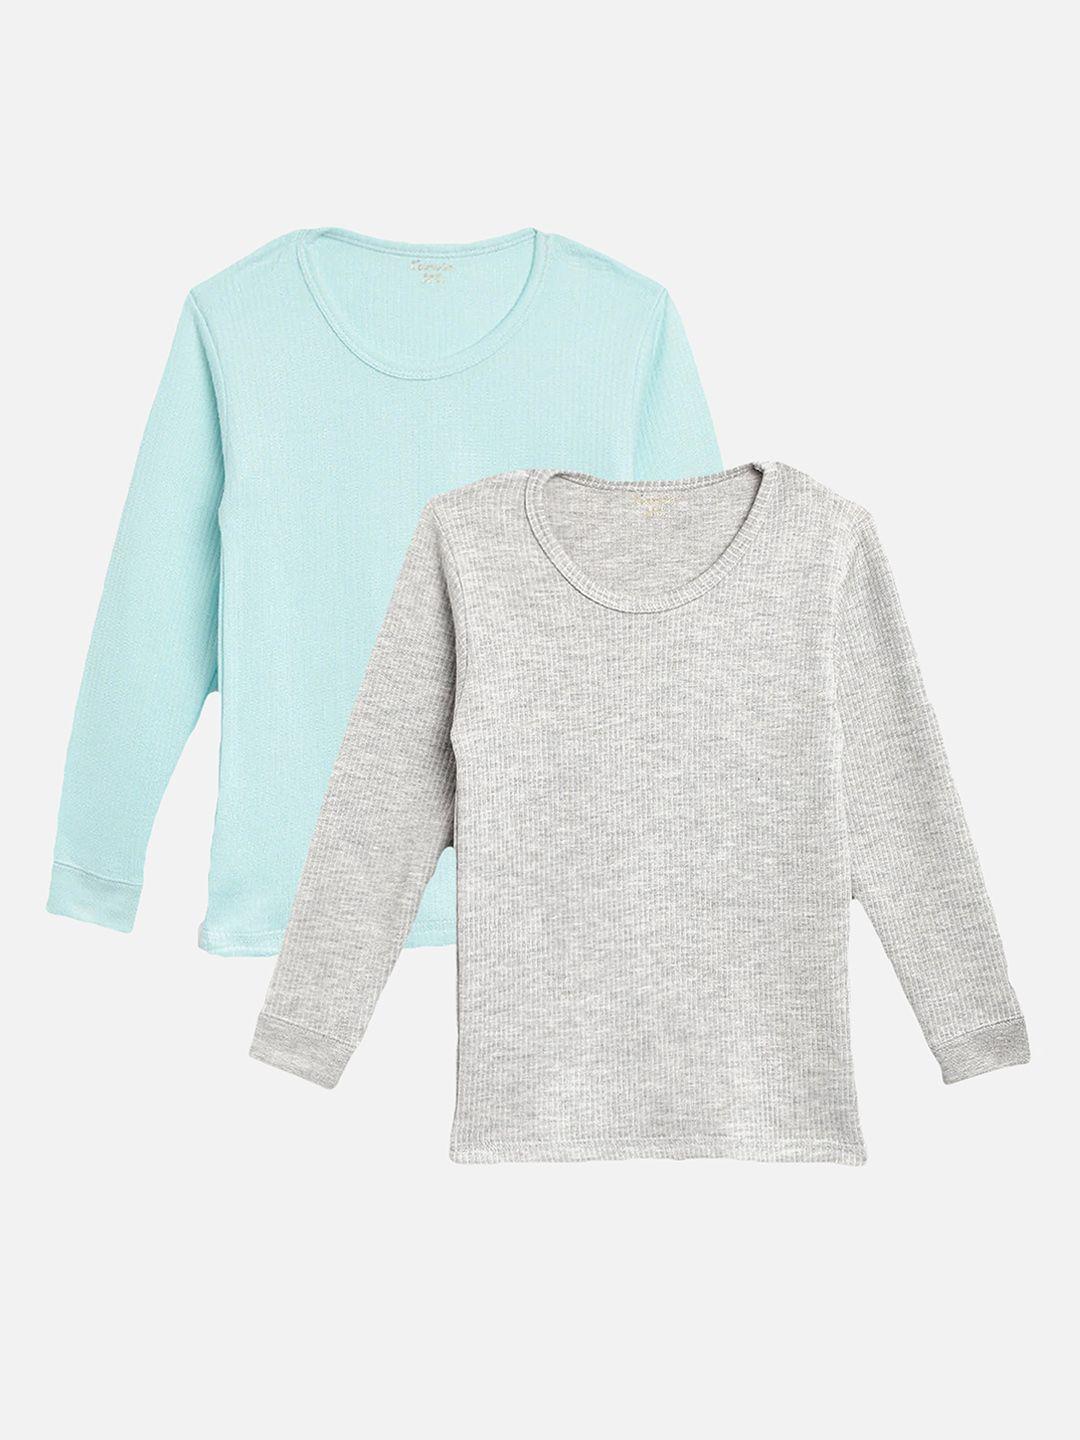 kanvin boys pack of 2 grey melange & turquoise blue ribbed cotton thermal tops